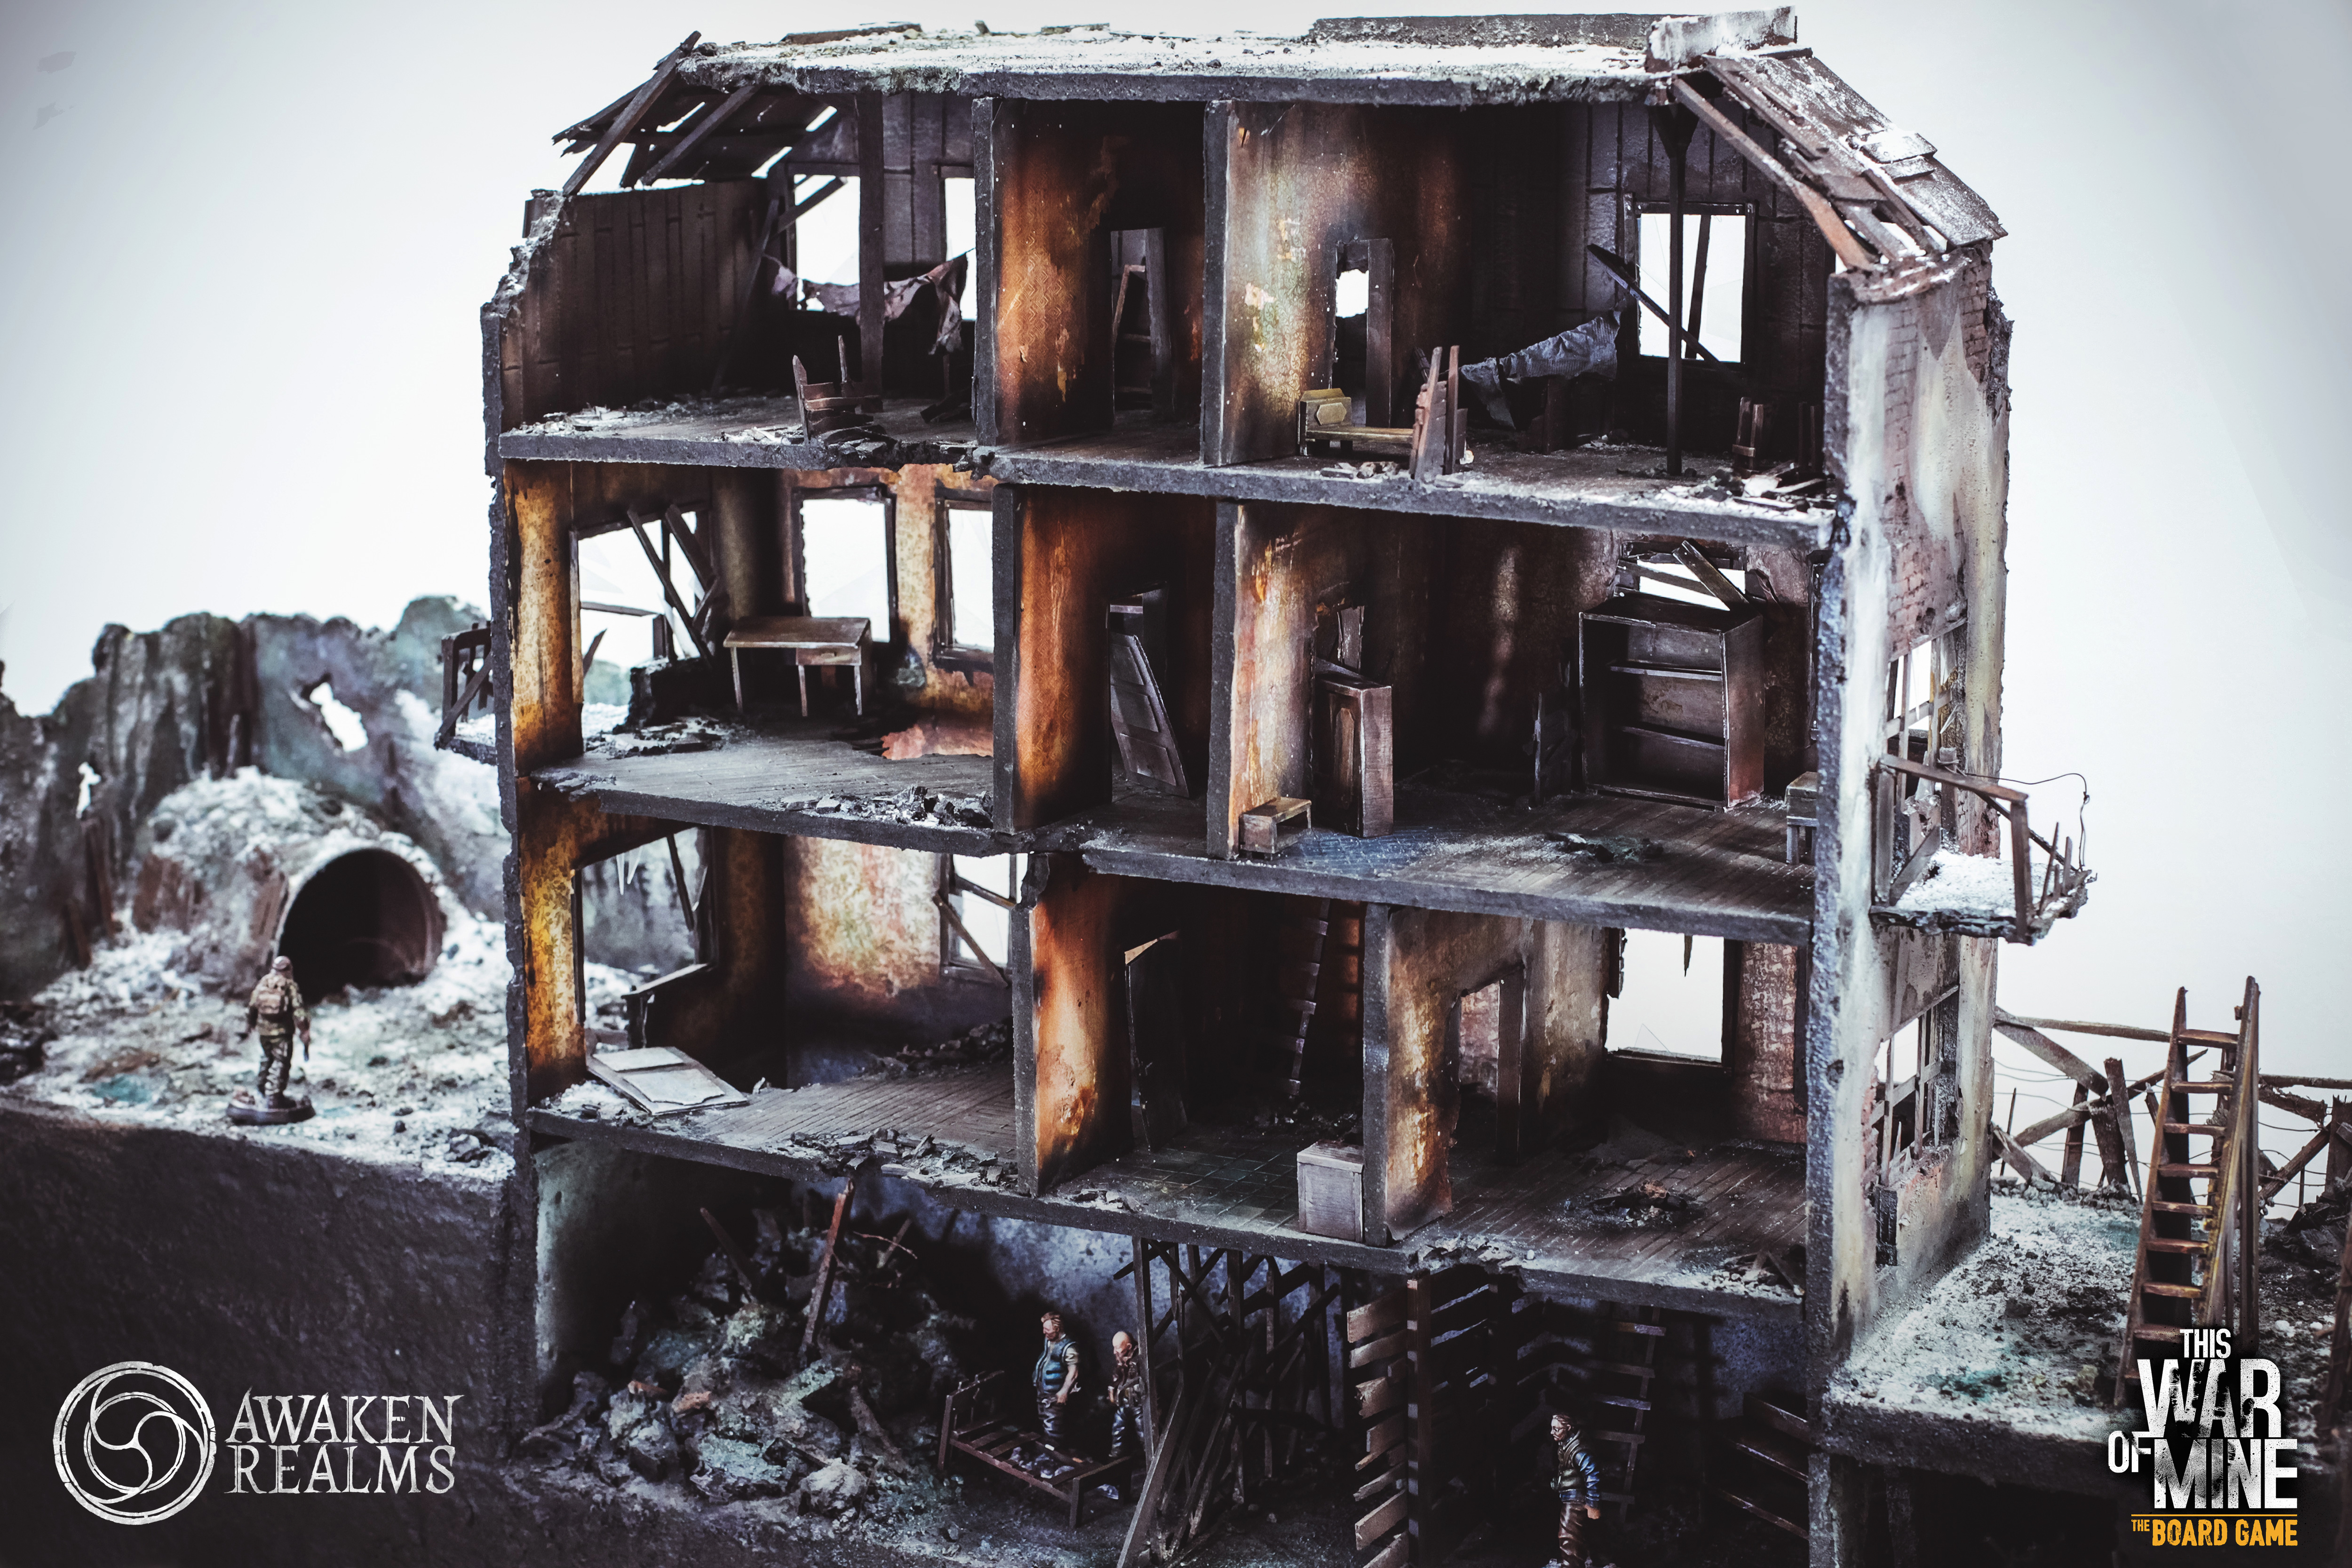 This War of Mine Shelter Diorama by Awaken Realms